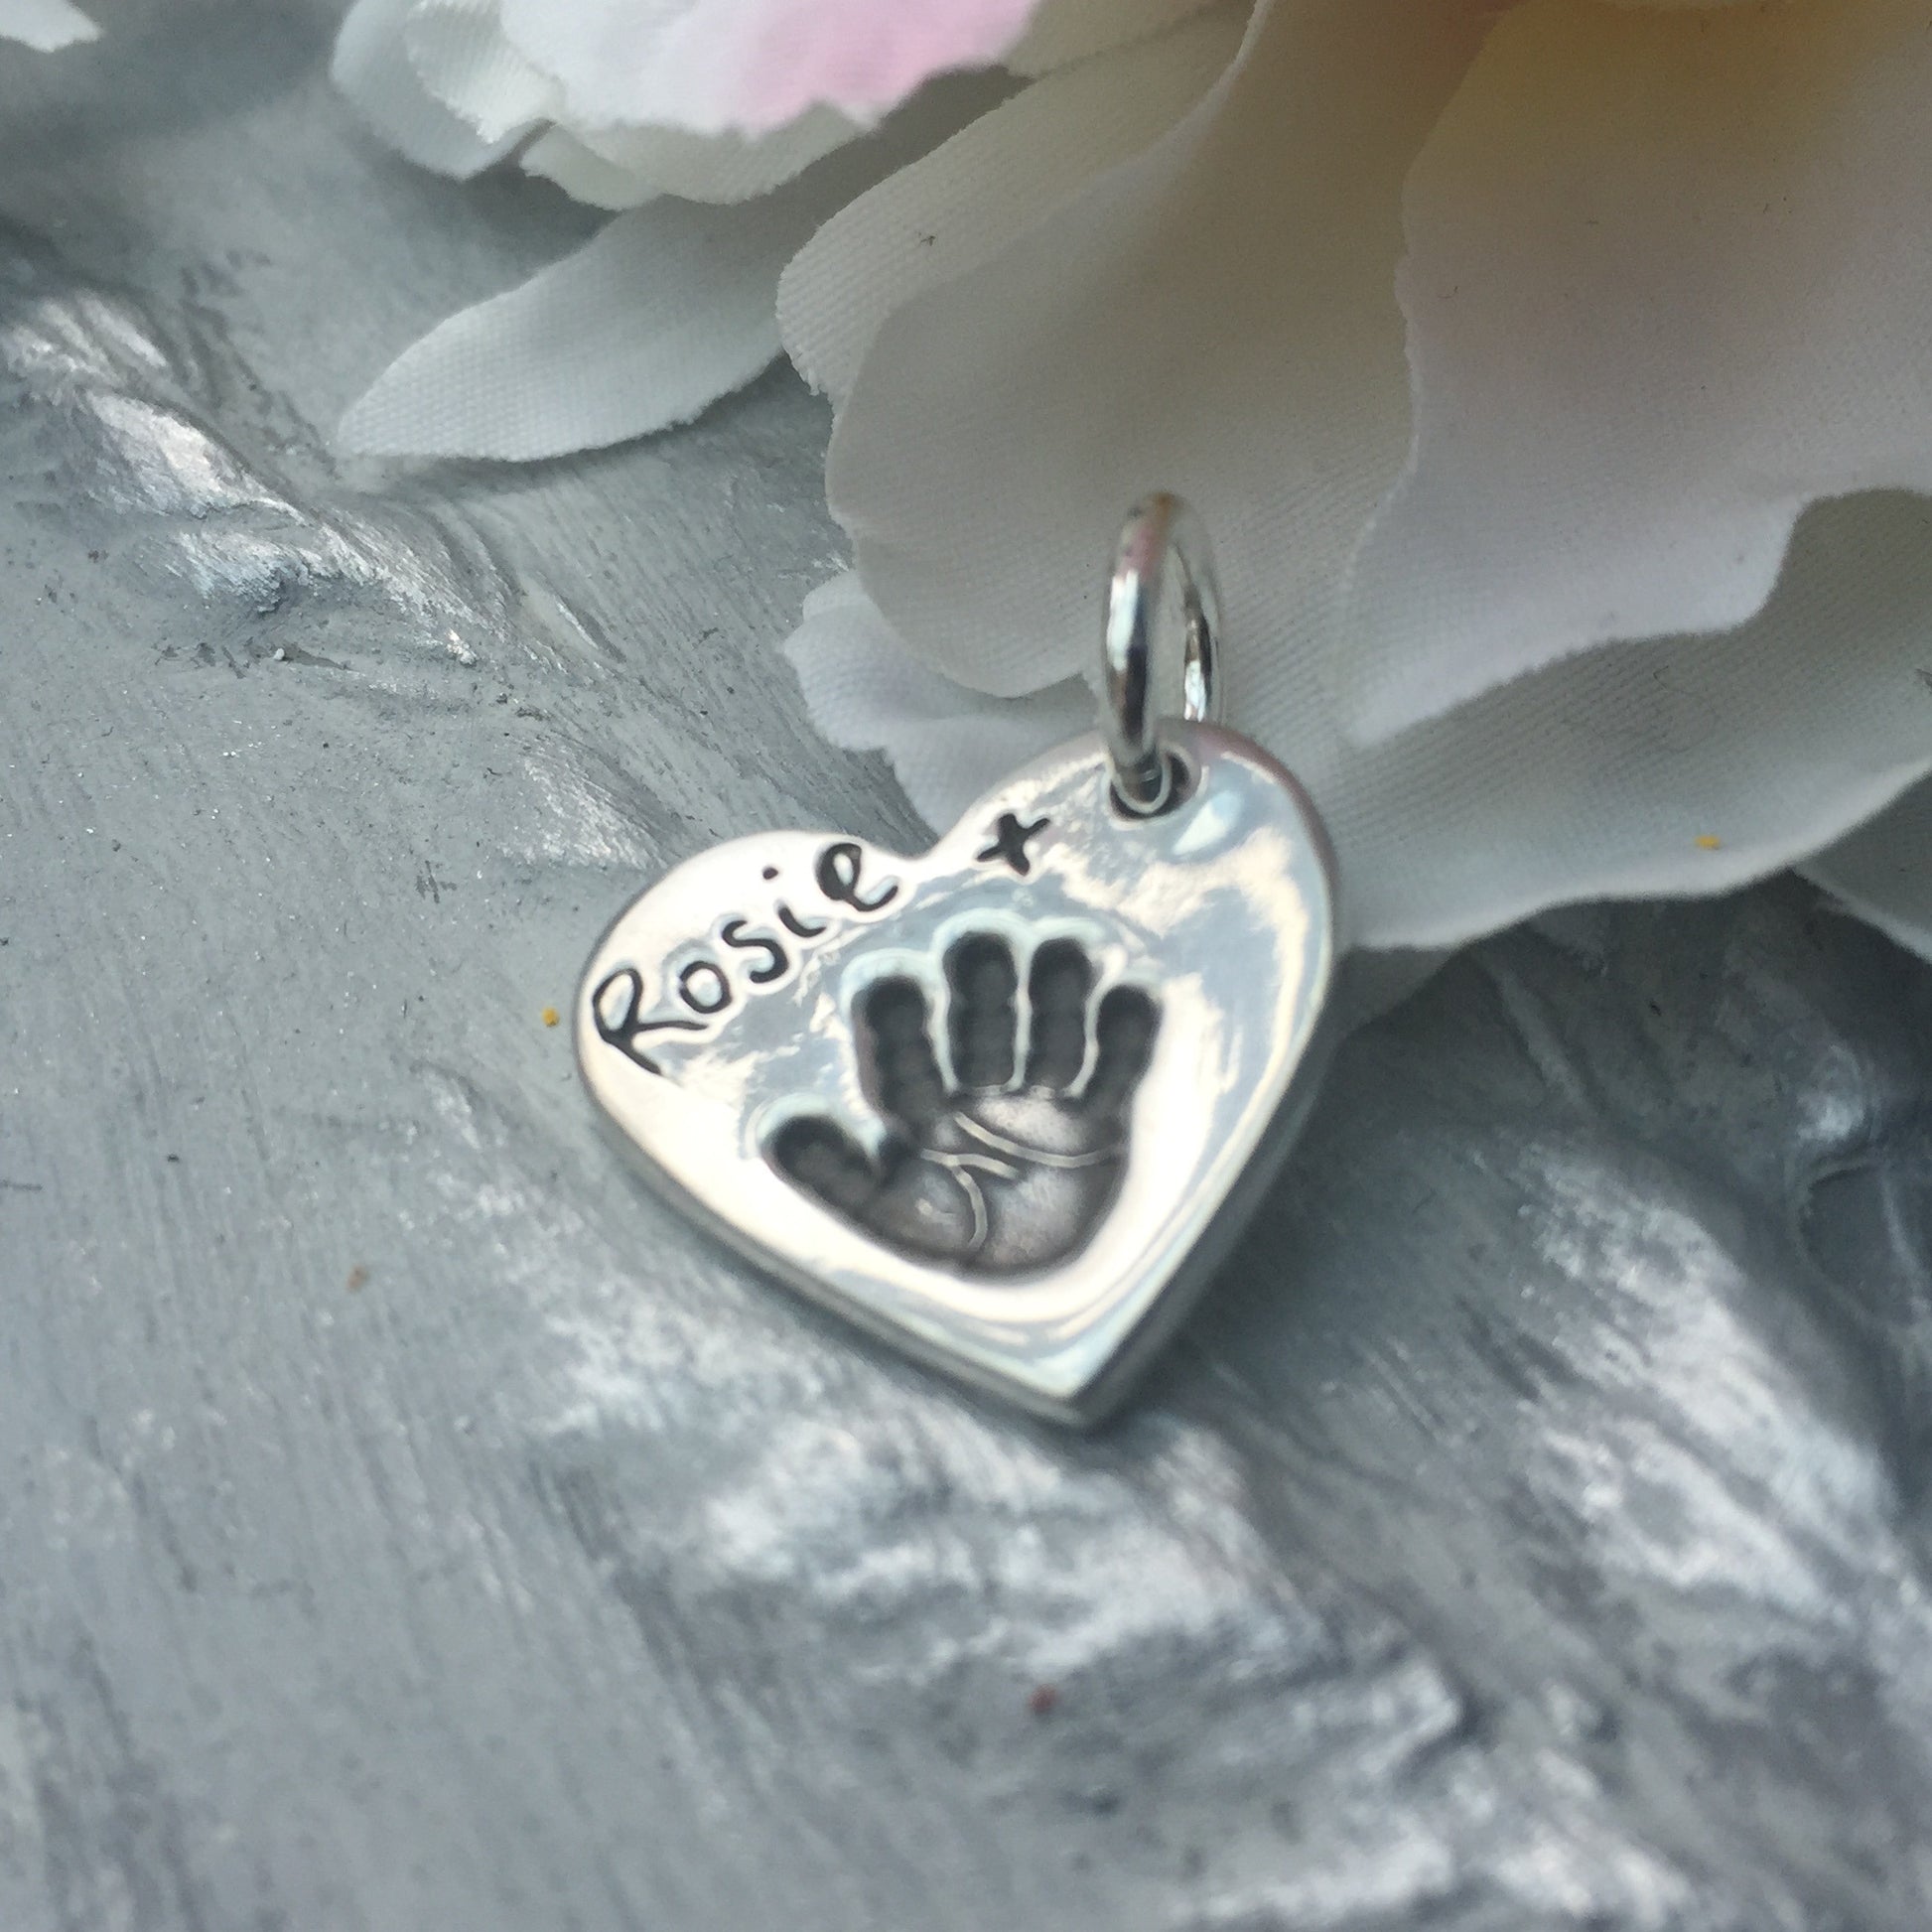 HANDPRINT CHARM WITH NAME AND KISS ON FRONT BY JOY IMPRESSIONS